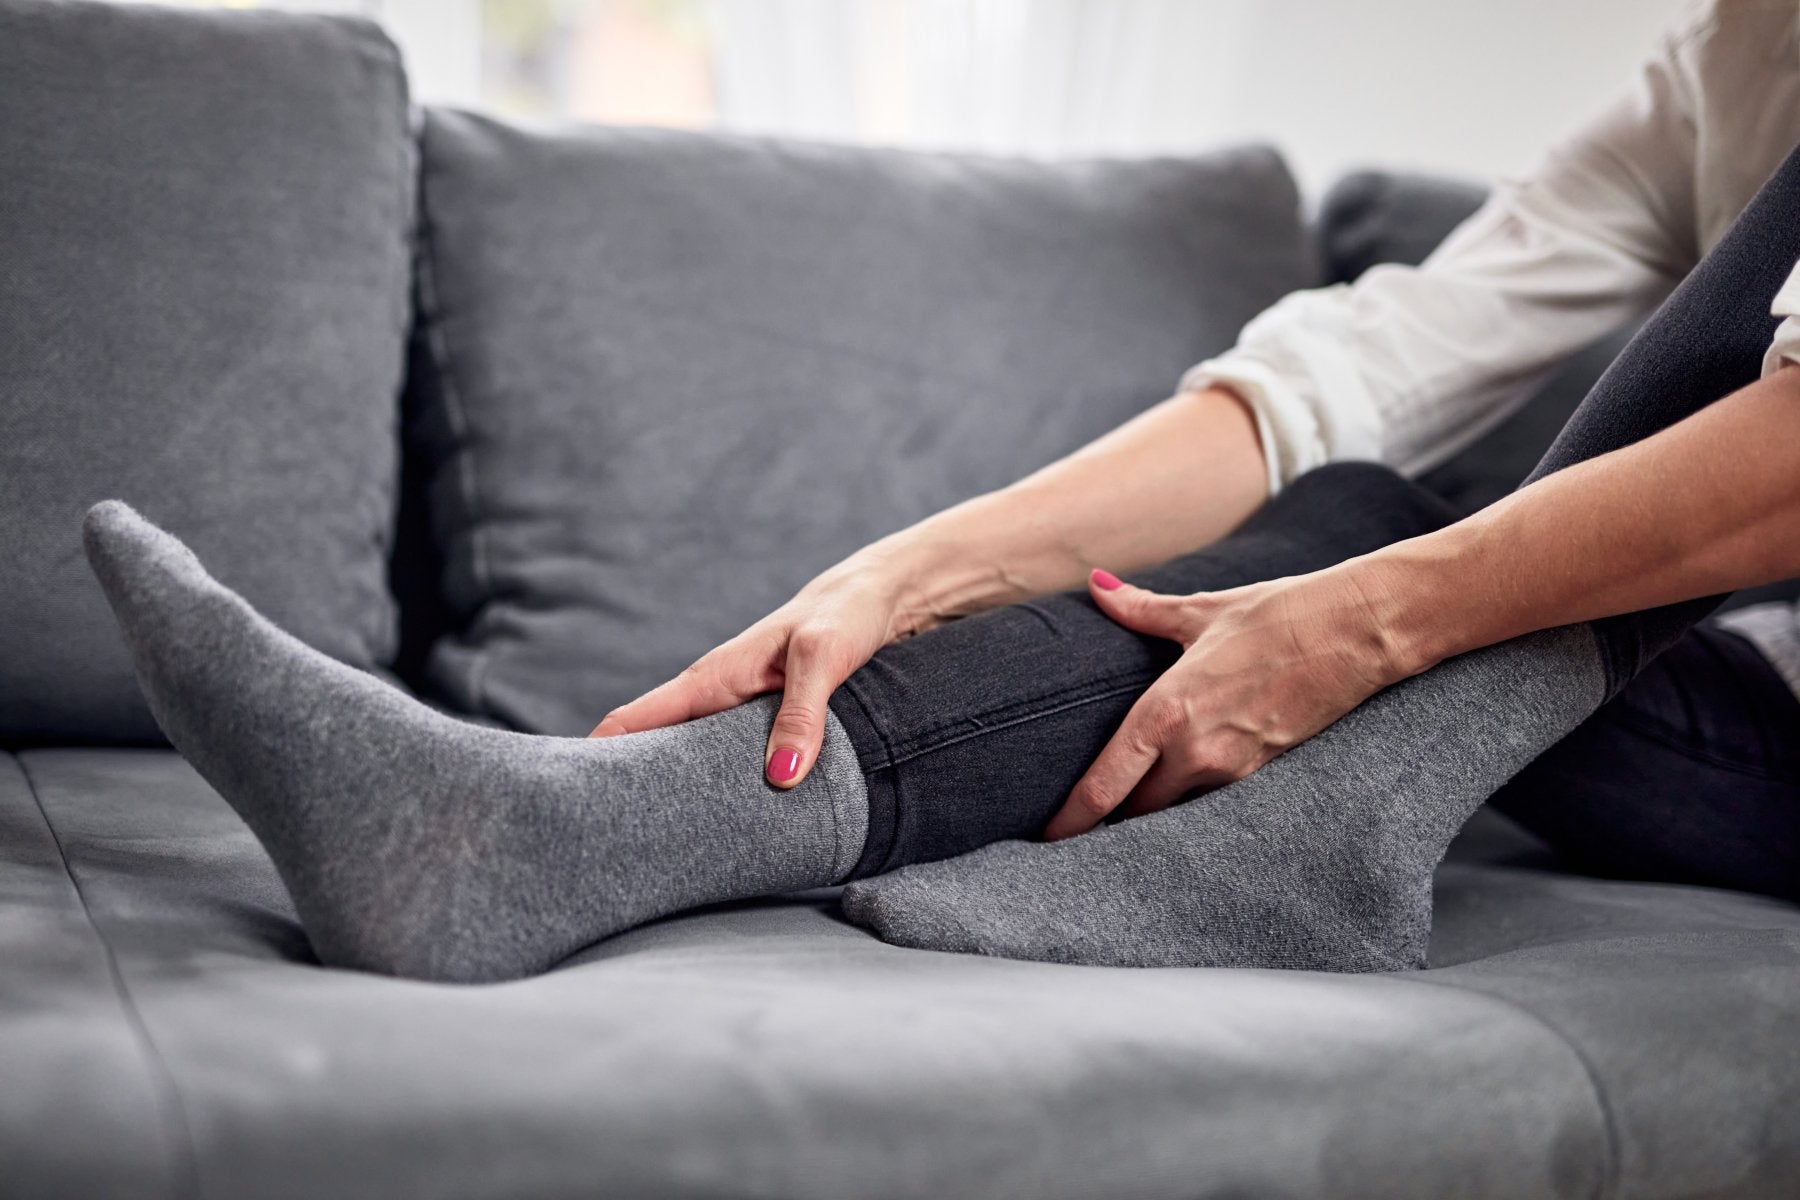 Woman massaging a muscle spasm on her calf